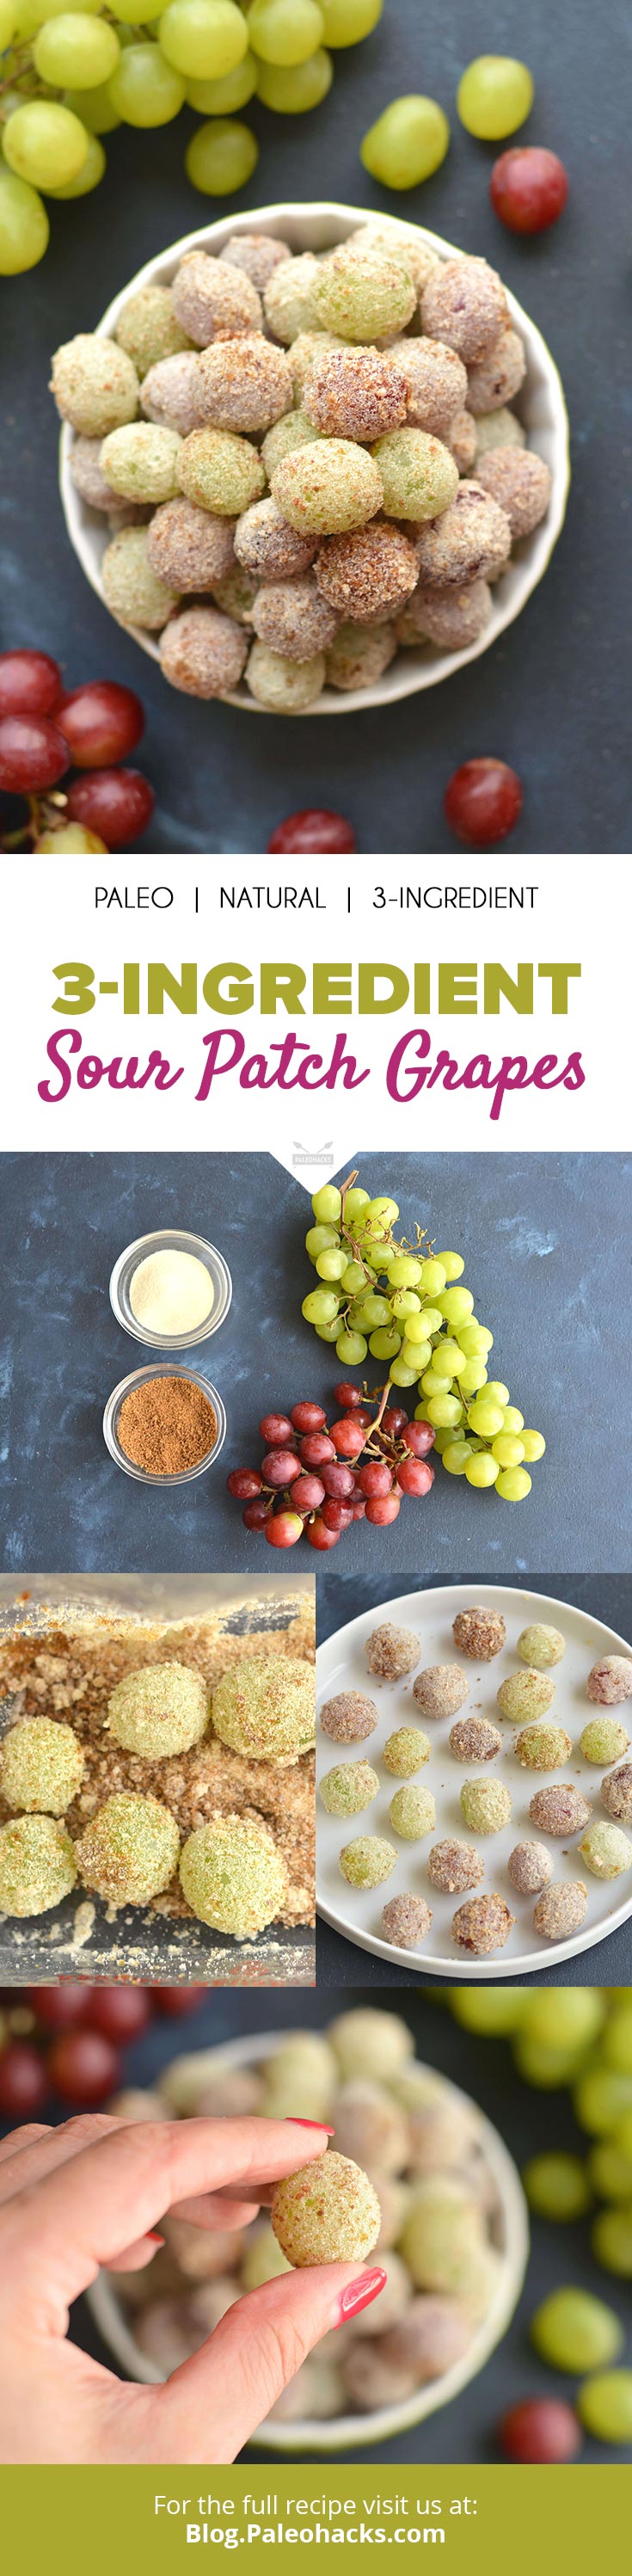 If you like sweet and tart candy, then you’re going to love the natural tangy flavor of these Sour Patch Grapes made with coconut sugar! 